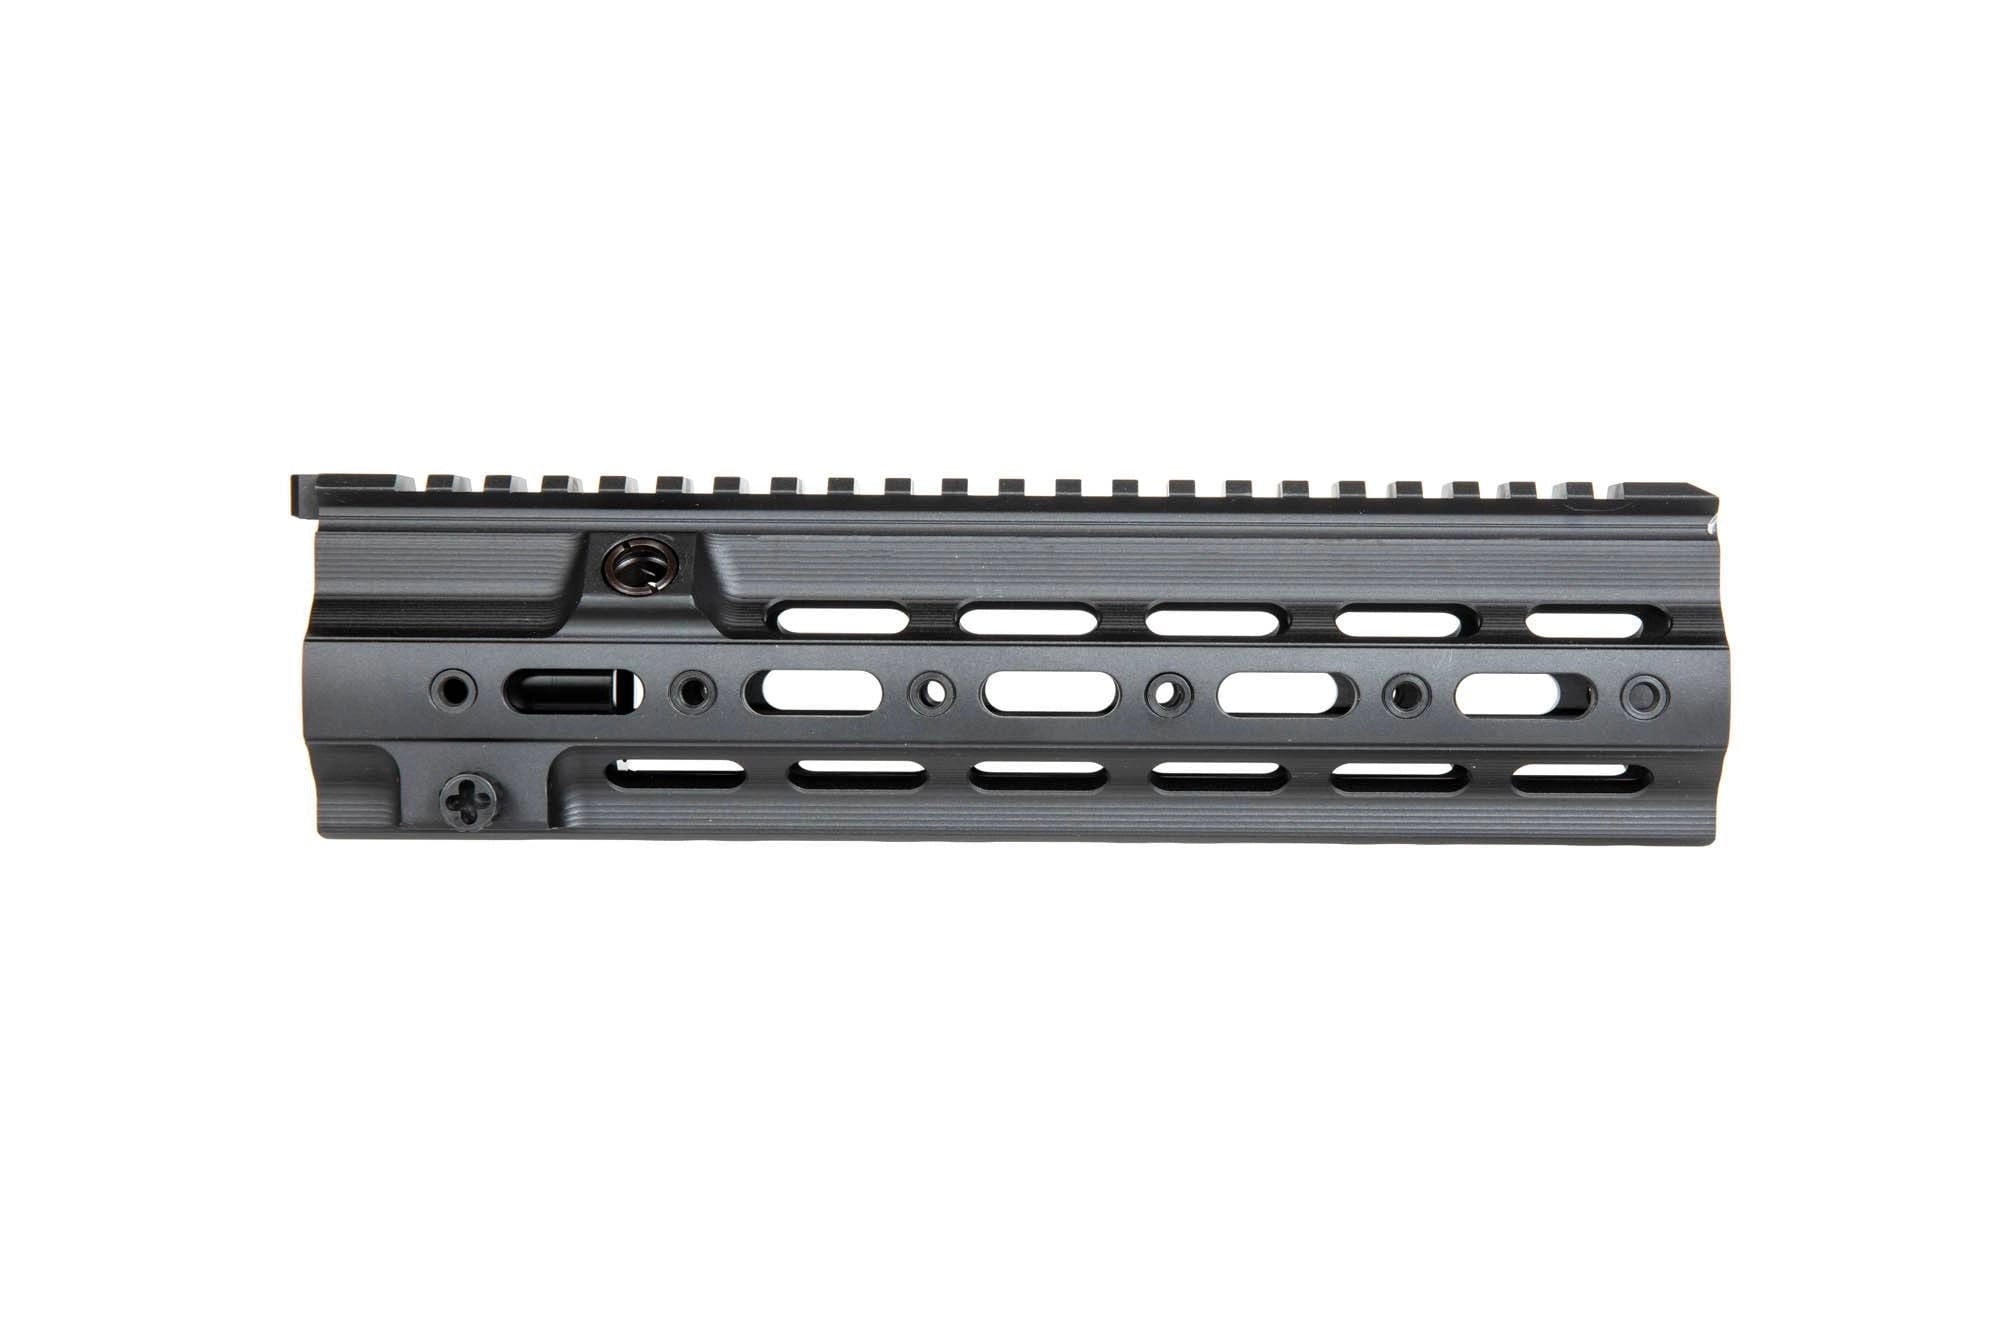 SMR-type RIS hand guard for HK416 airsoft rifles - black